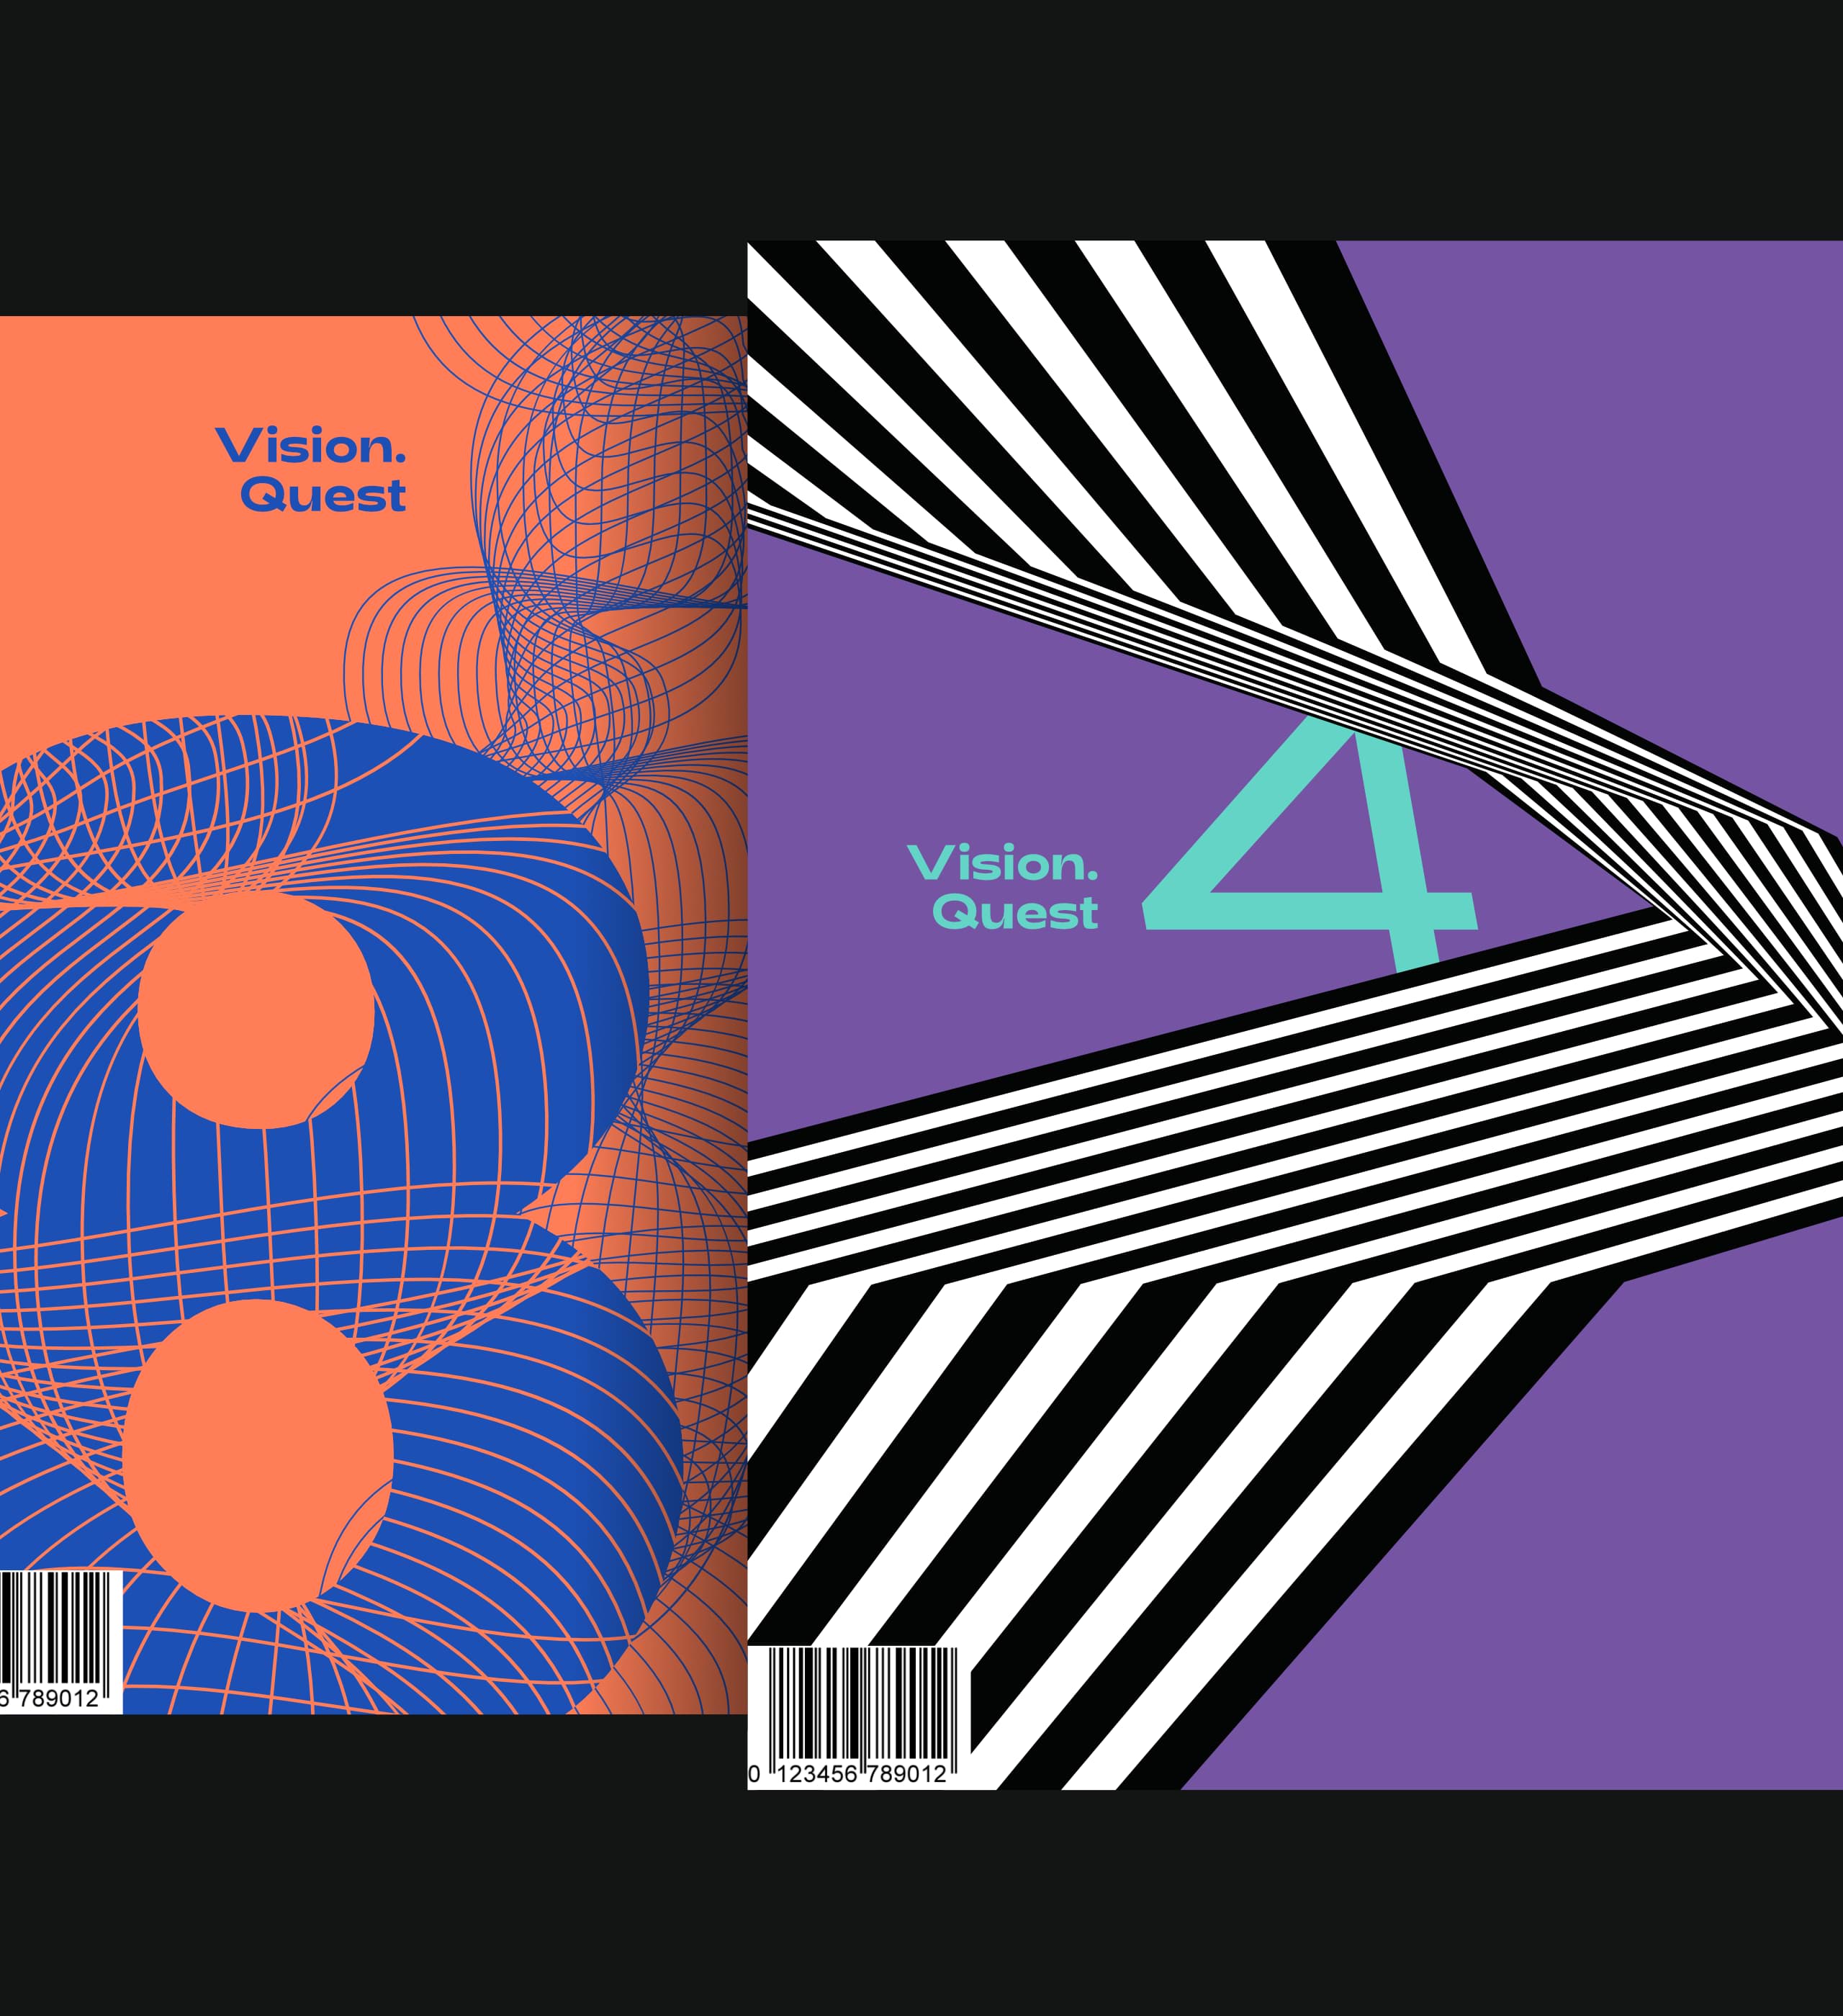 Two page layouts with geometric shapes on them each with the title “Vision. Quest”. One orange with a blue number 8 on it and the other purple with a teal colored number 4 on it.